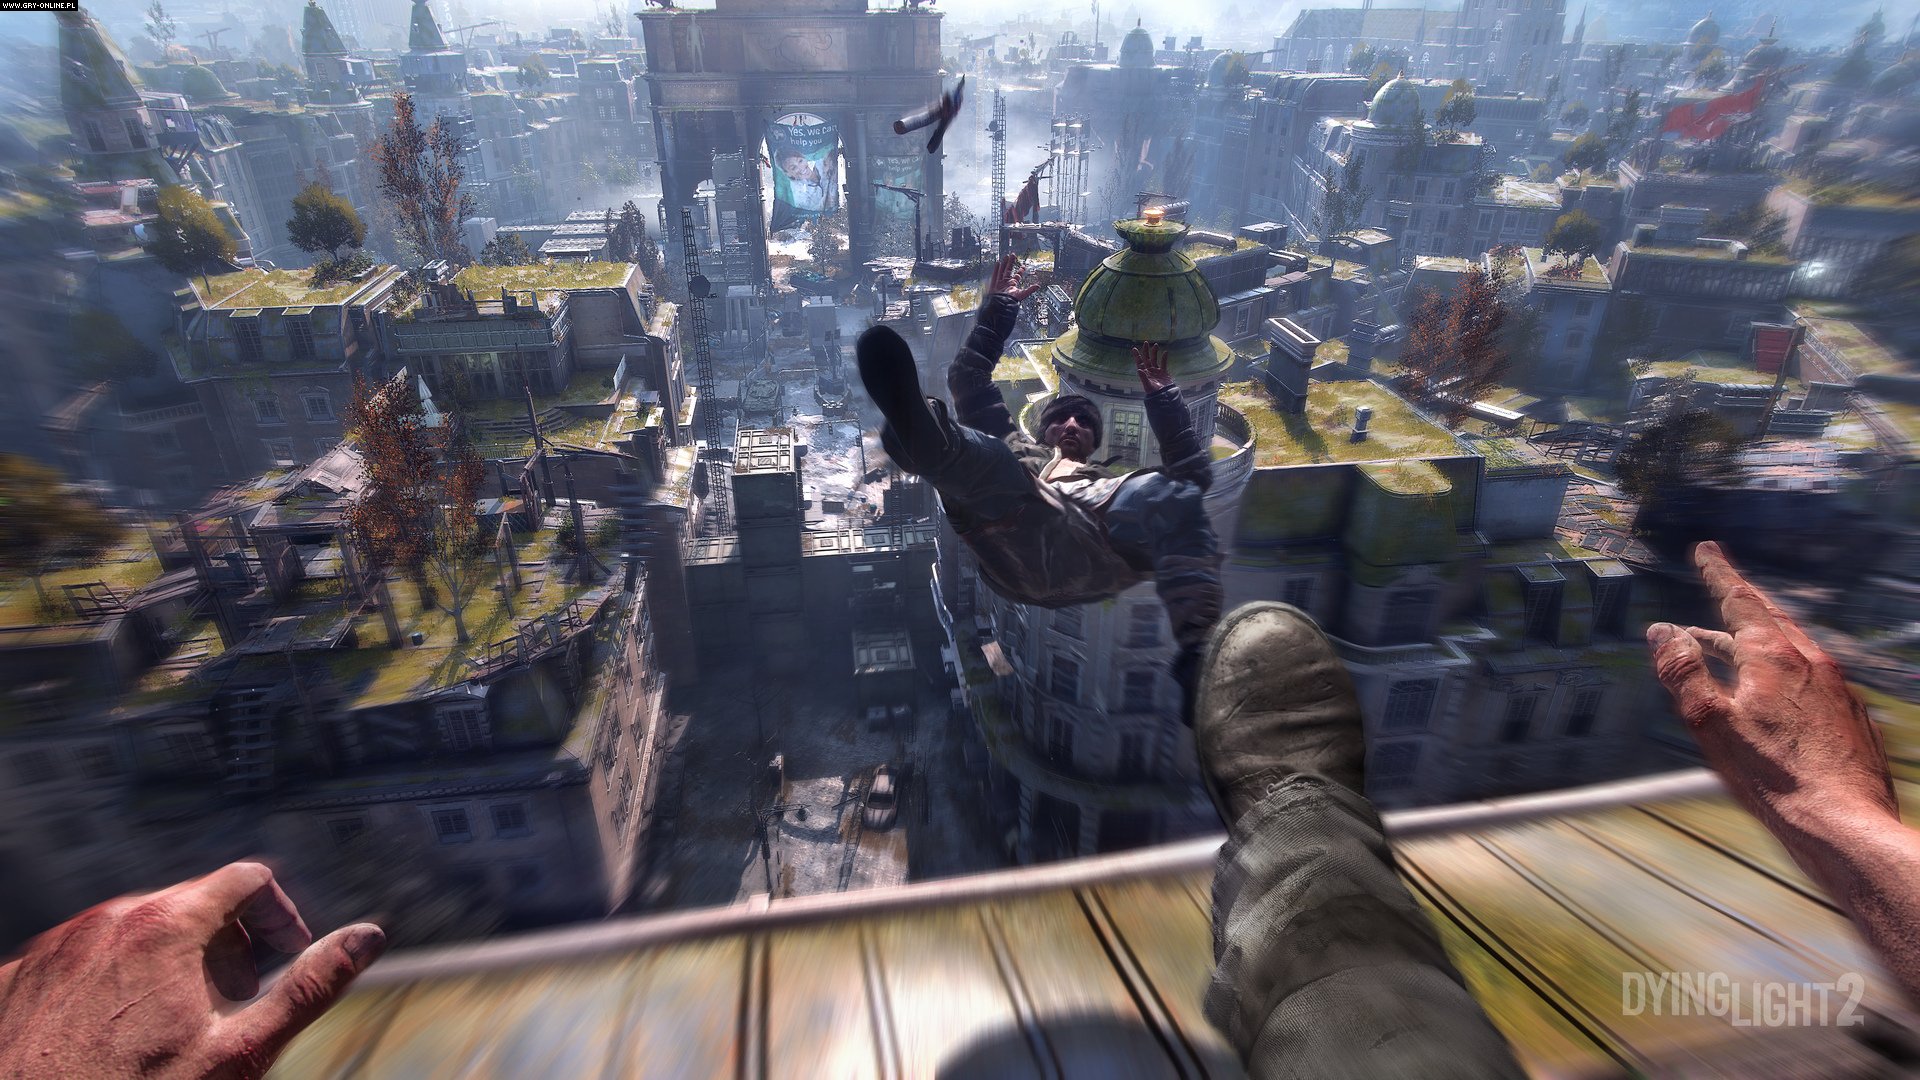 Dying Light 2 Will Be Enhanced for PS4 Pro and Xbox One X “In Some Way”